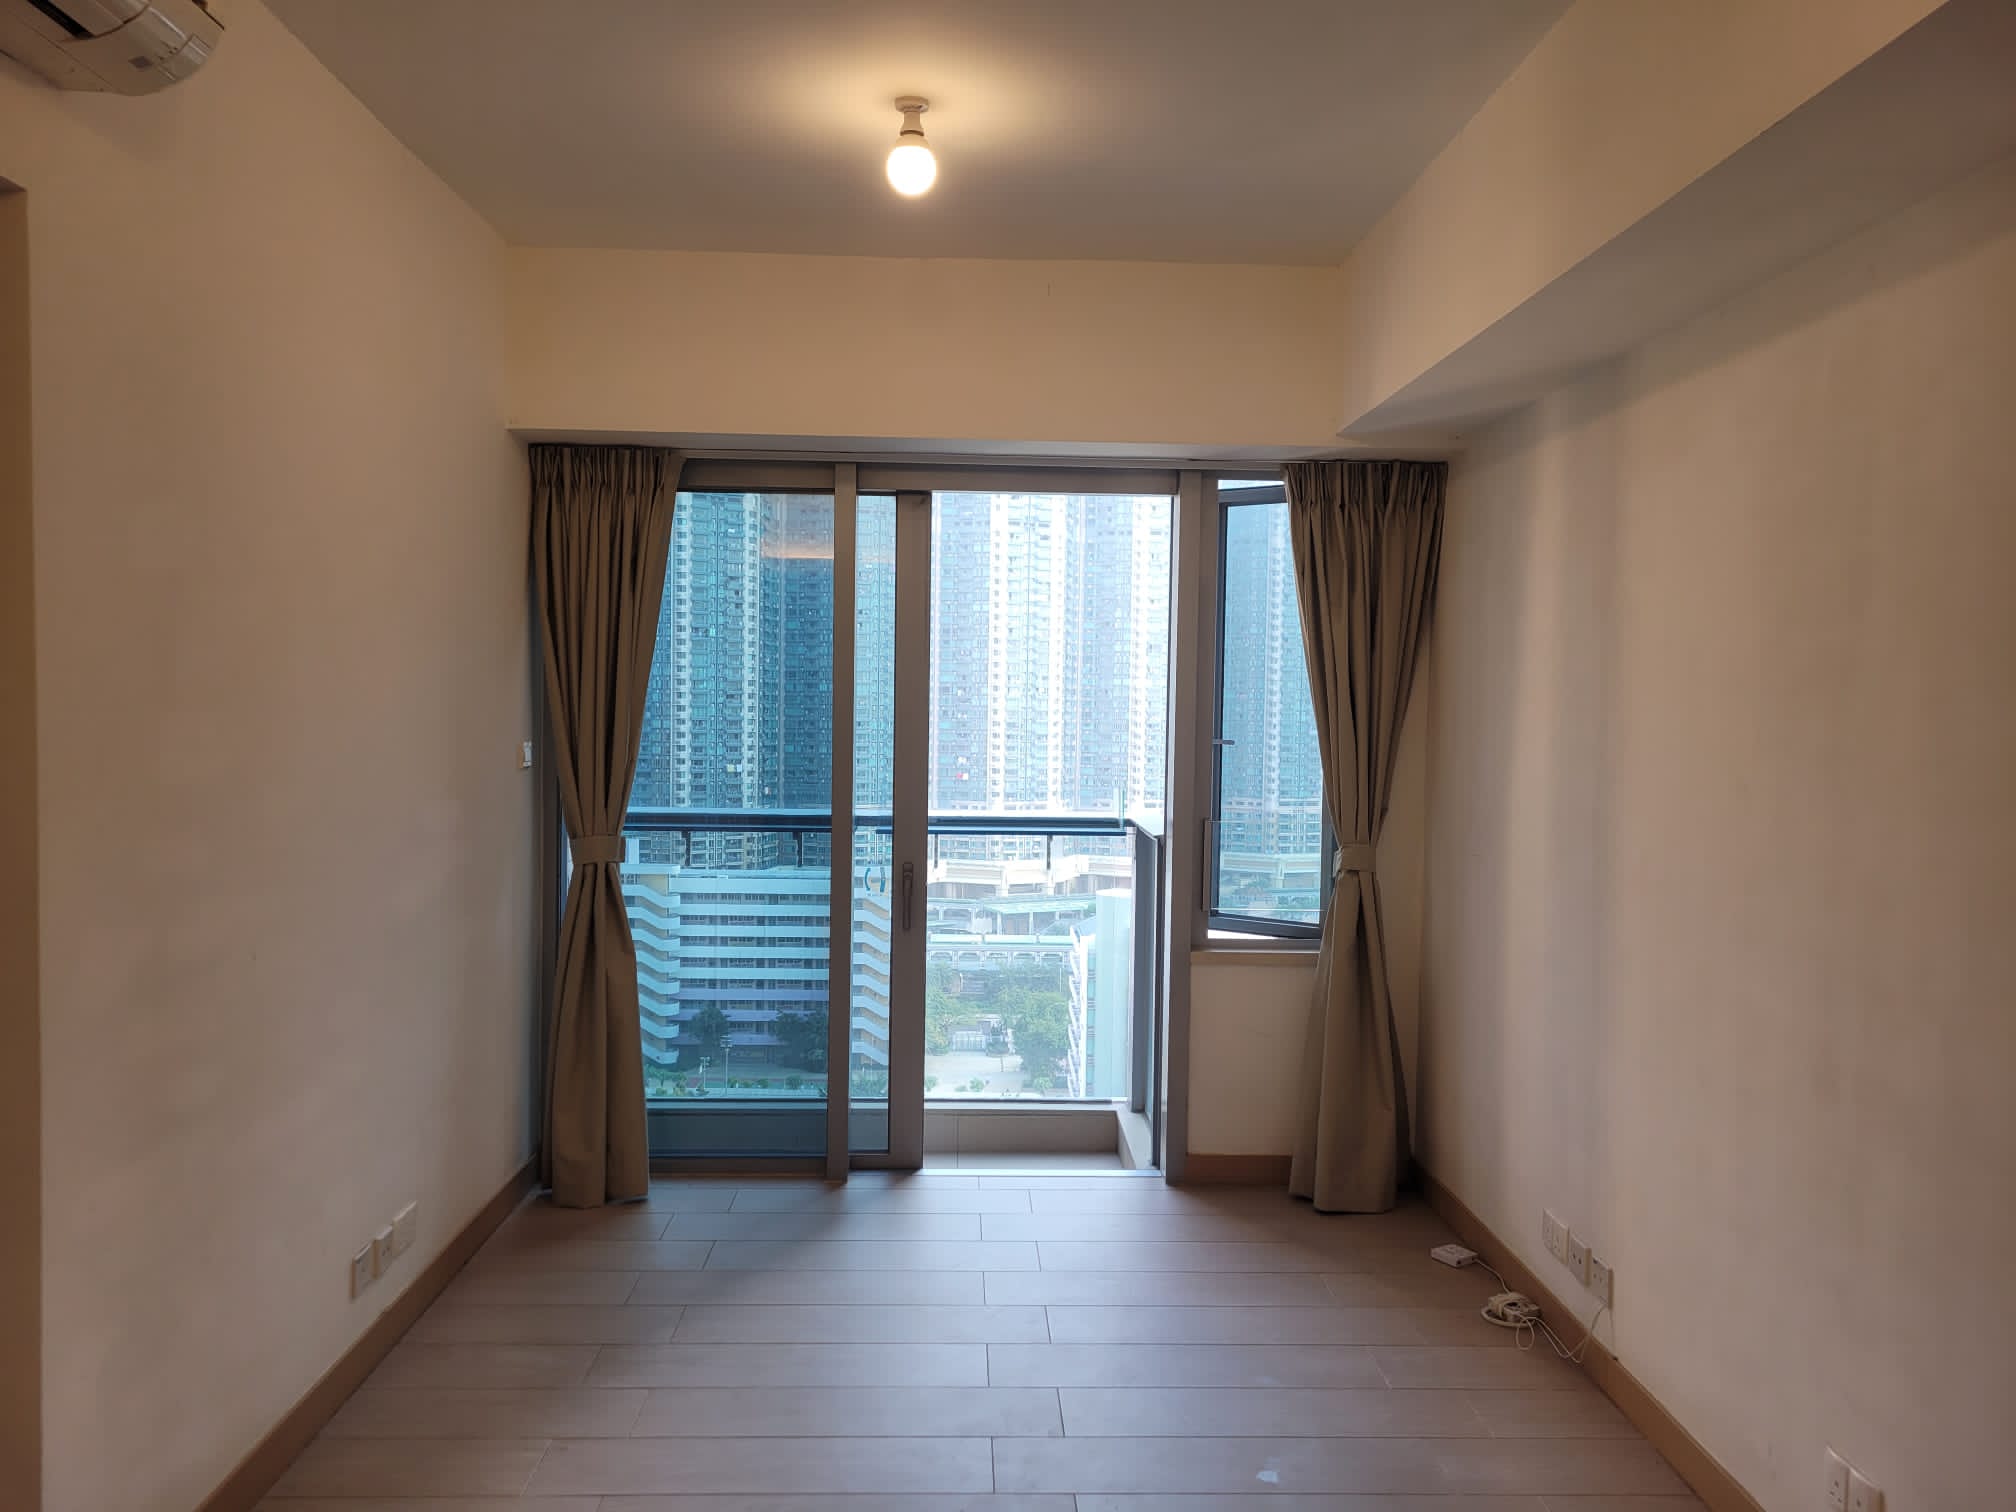 Two-bedroom and half-high-rise in the emerald green inner garden for rent